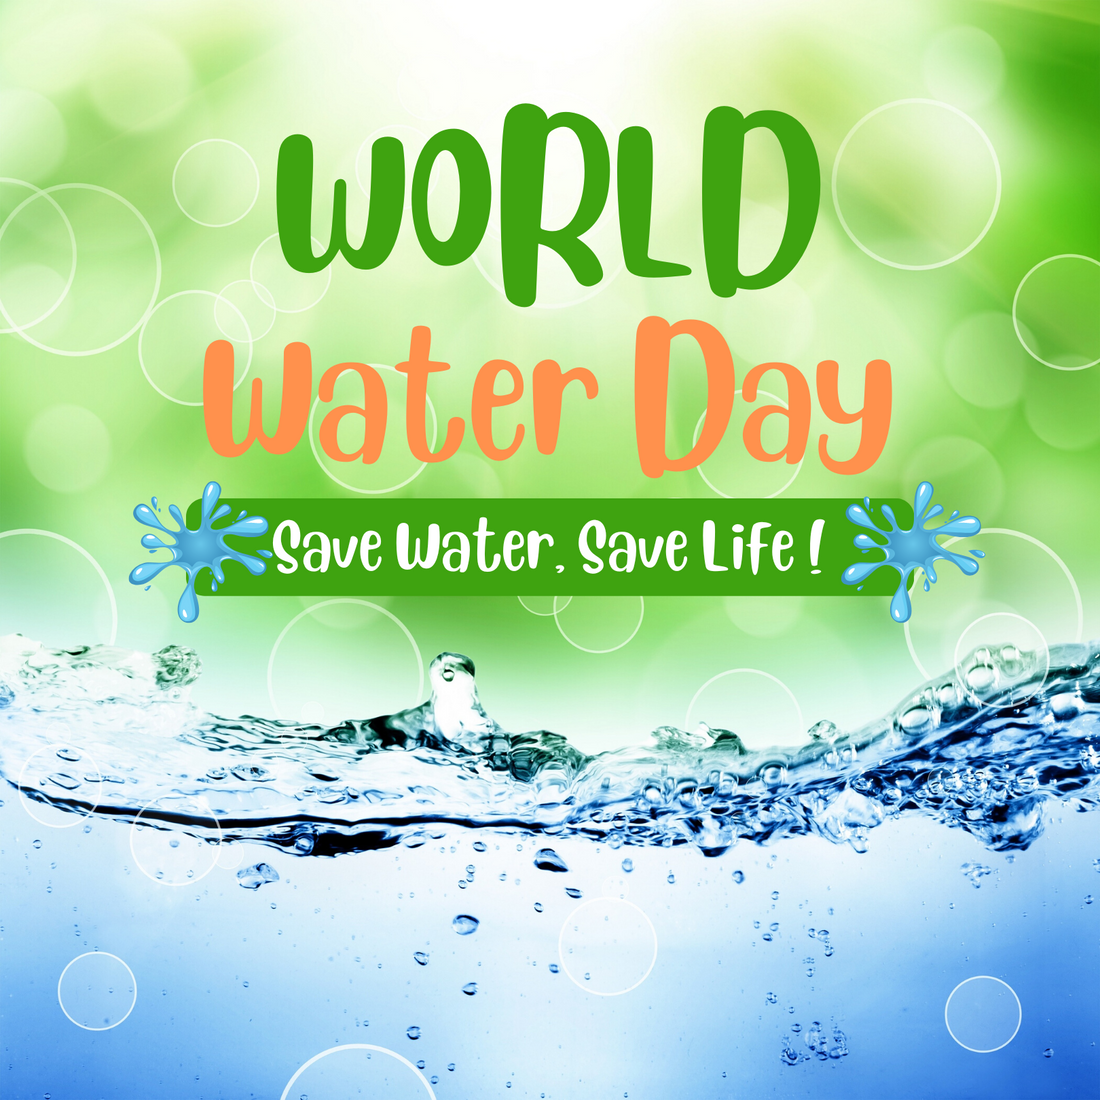 7 Effective Ways to Conserve Water on World Water Day